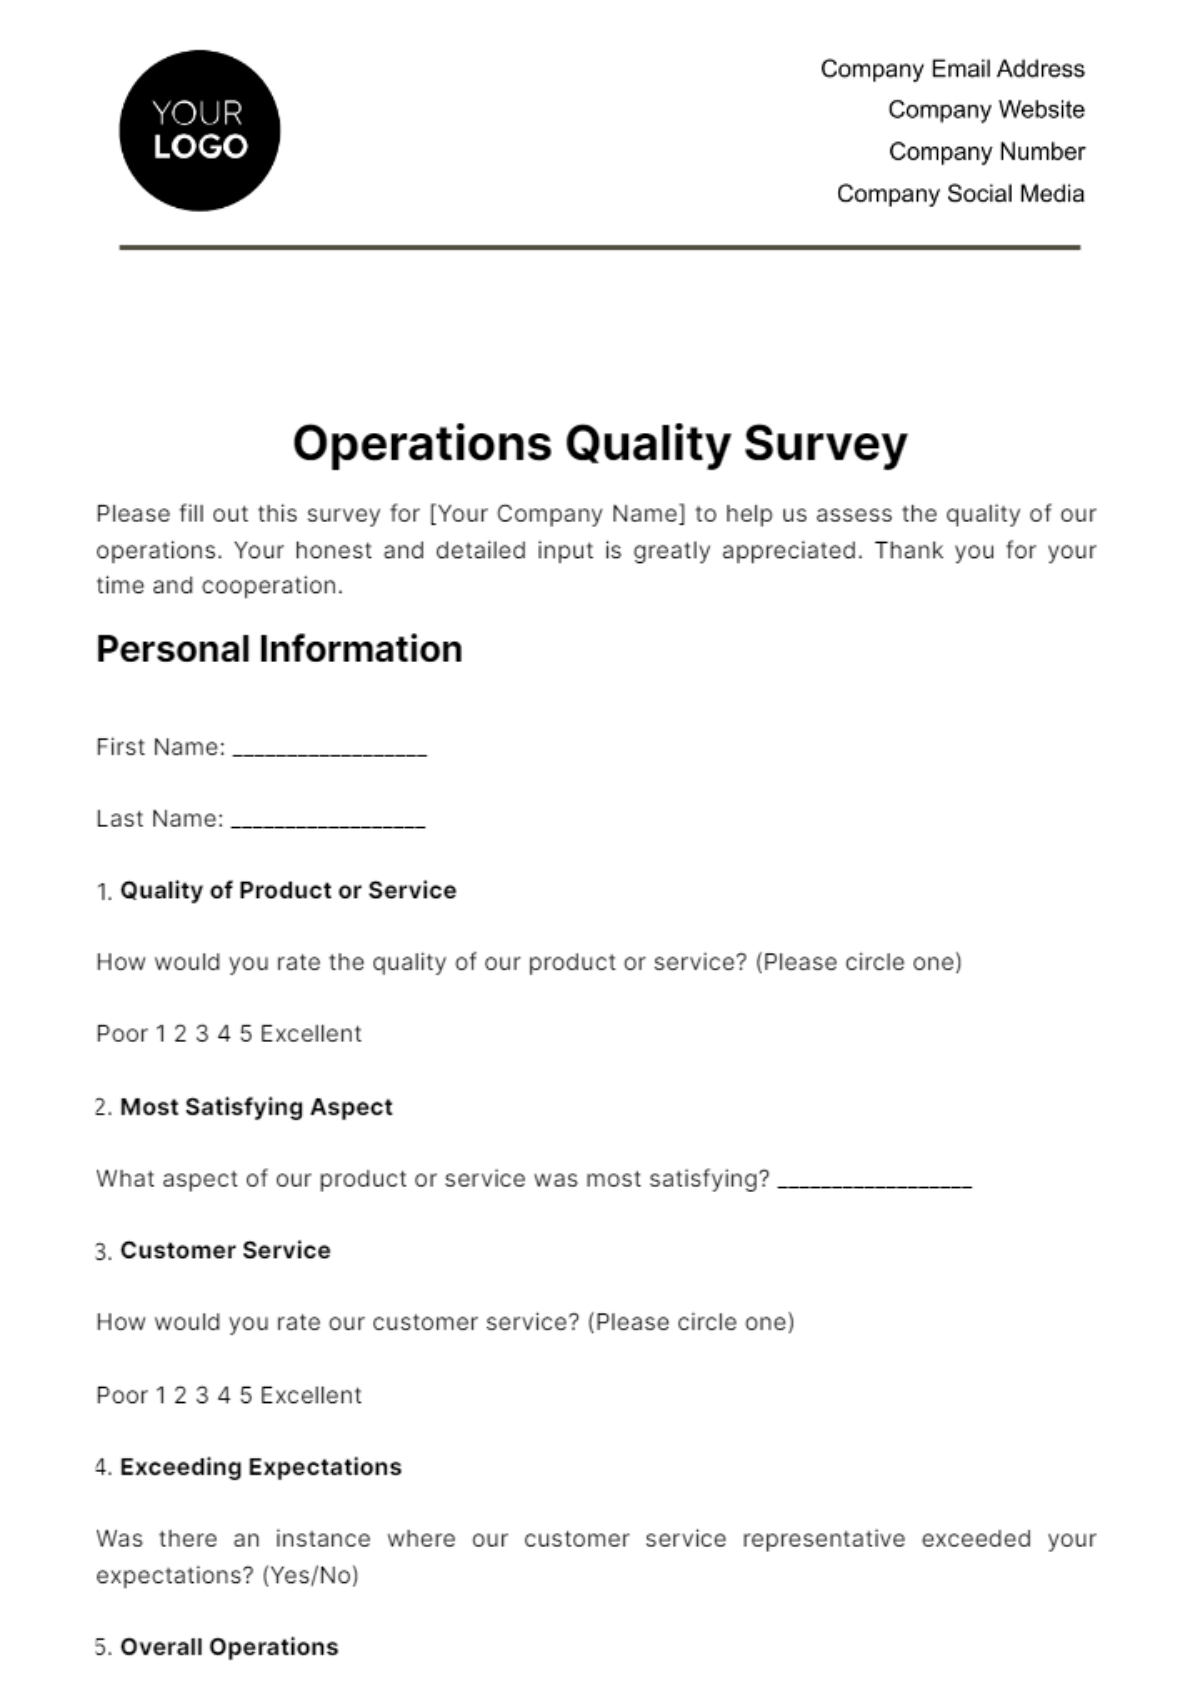 Operations Quality Survey Template